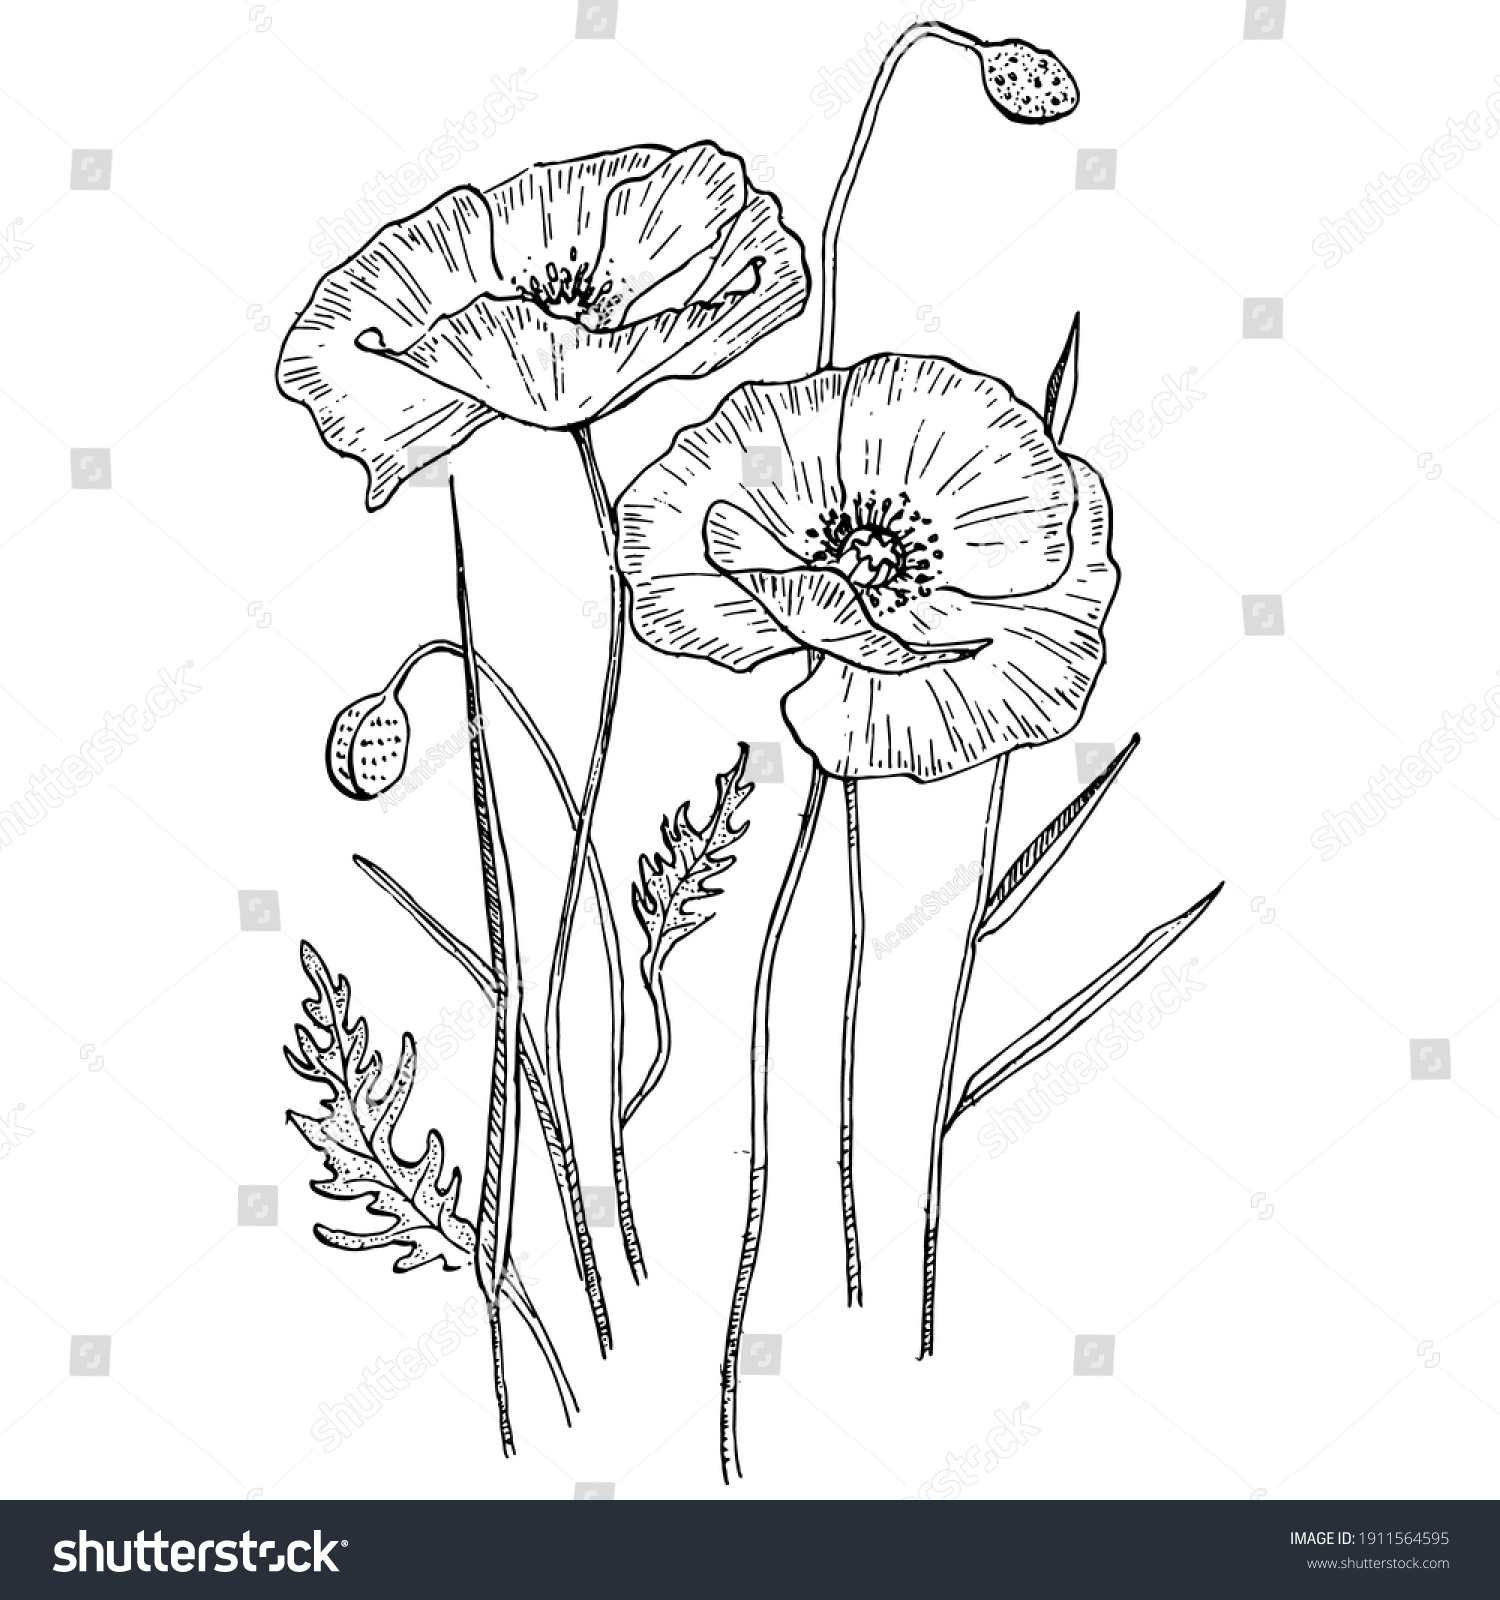 Poppies Floral Botanical Flower Isolated Illustration Stock Vector ...